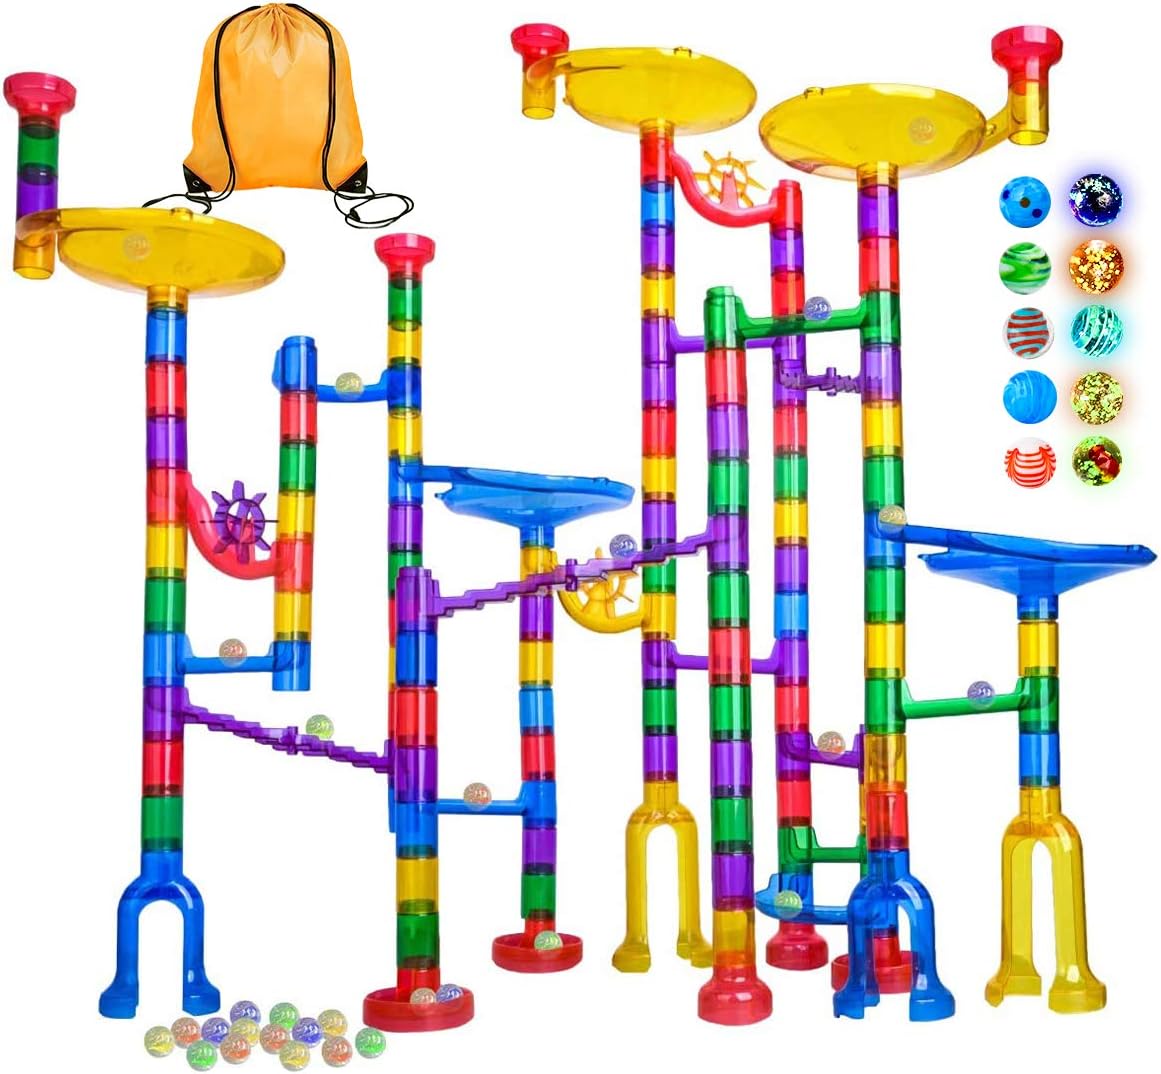 Meland Marble Run - 132Pcs Marble Maze Game Building Toy for Kid, Marble Track Race SetSTEM Learning Toy Gift for Boy Girl Age 4 5 6 7 8 9+ (102 Translucent Marbulous Pcs 30 Glass Marbles)